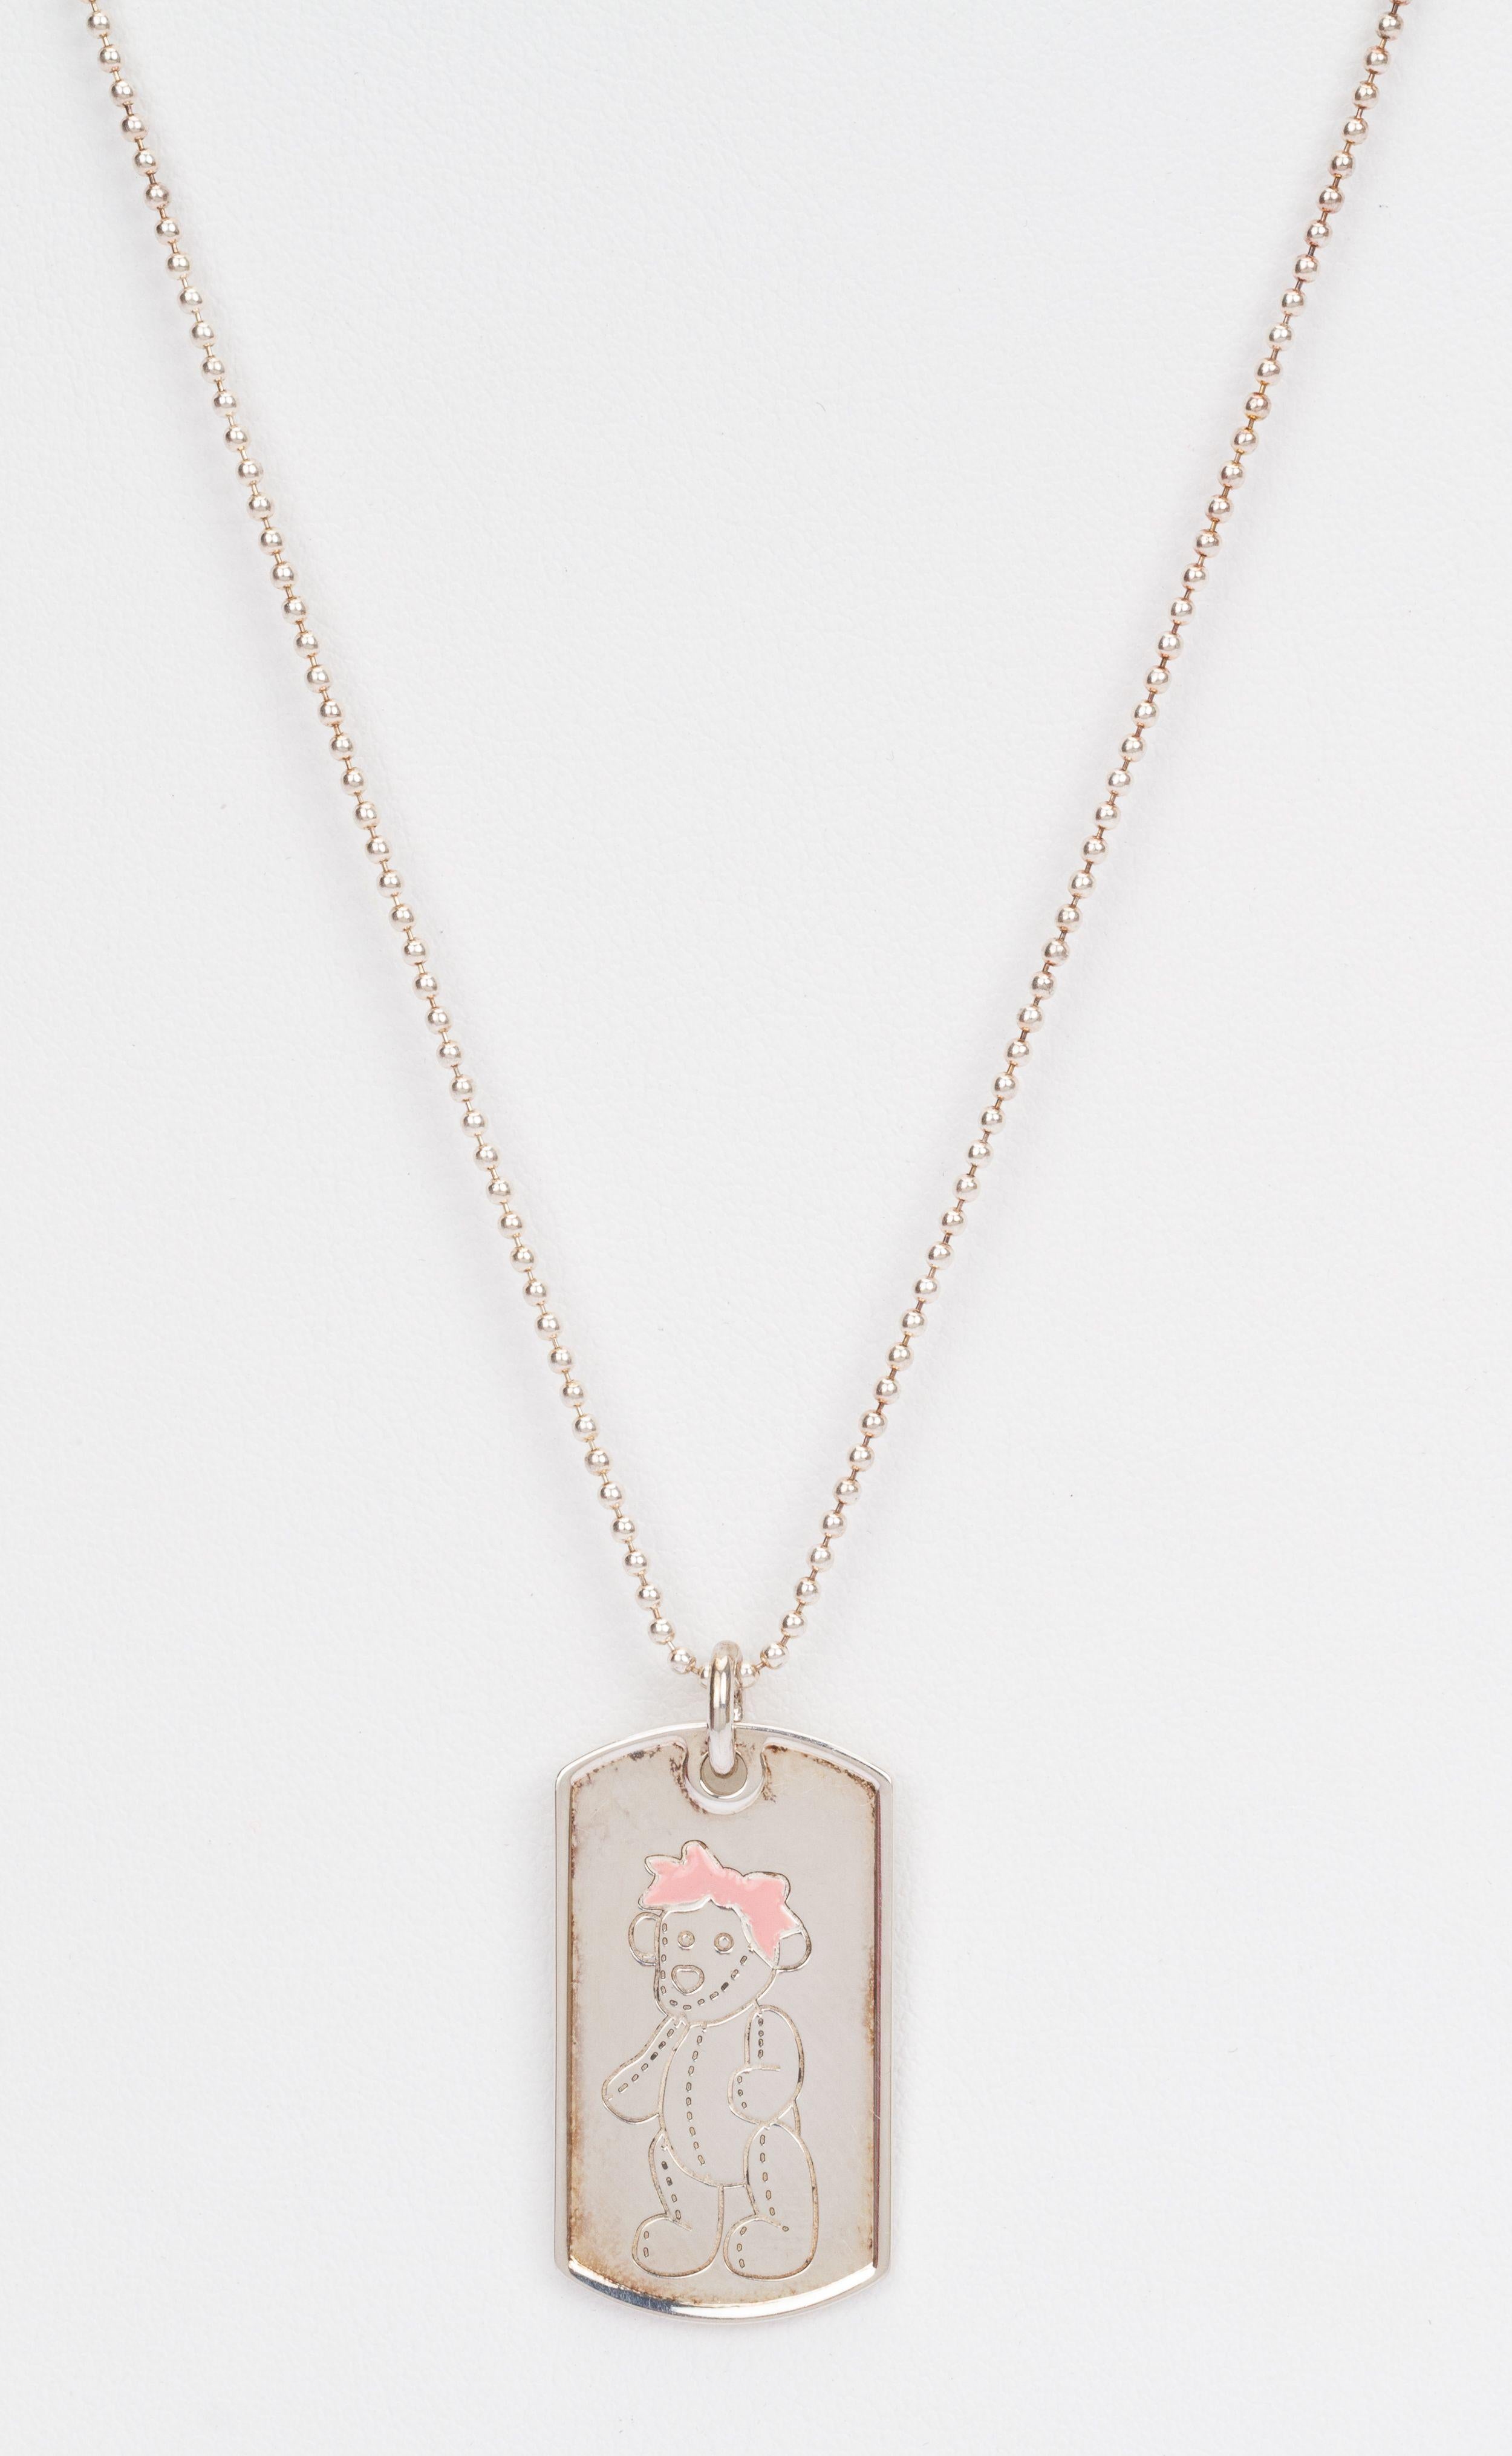 Gucci Sterling Teddy Bear Necklace - Vintage Lux